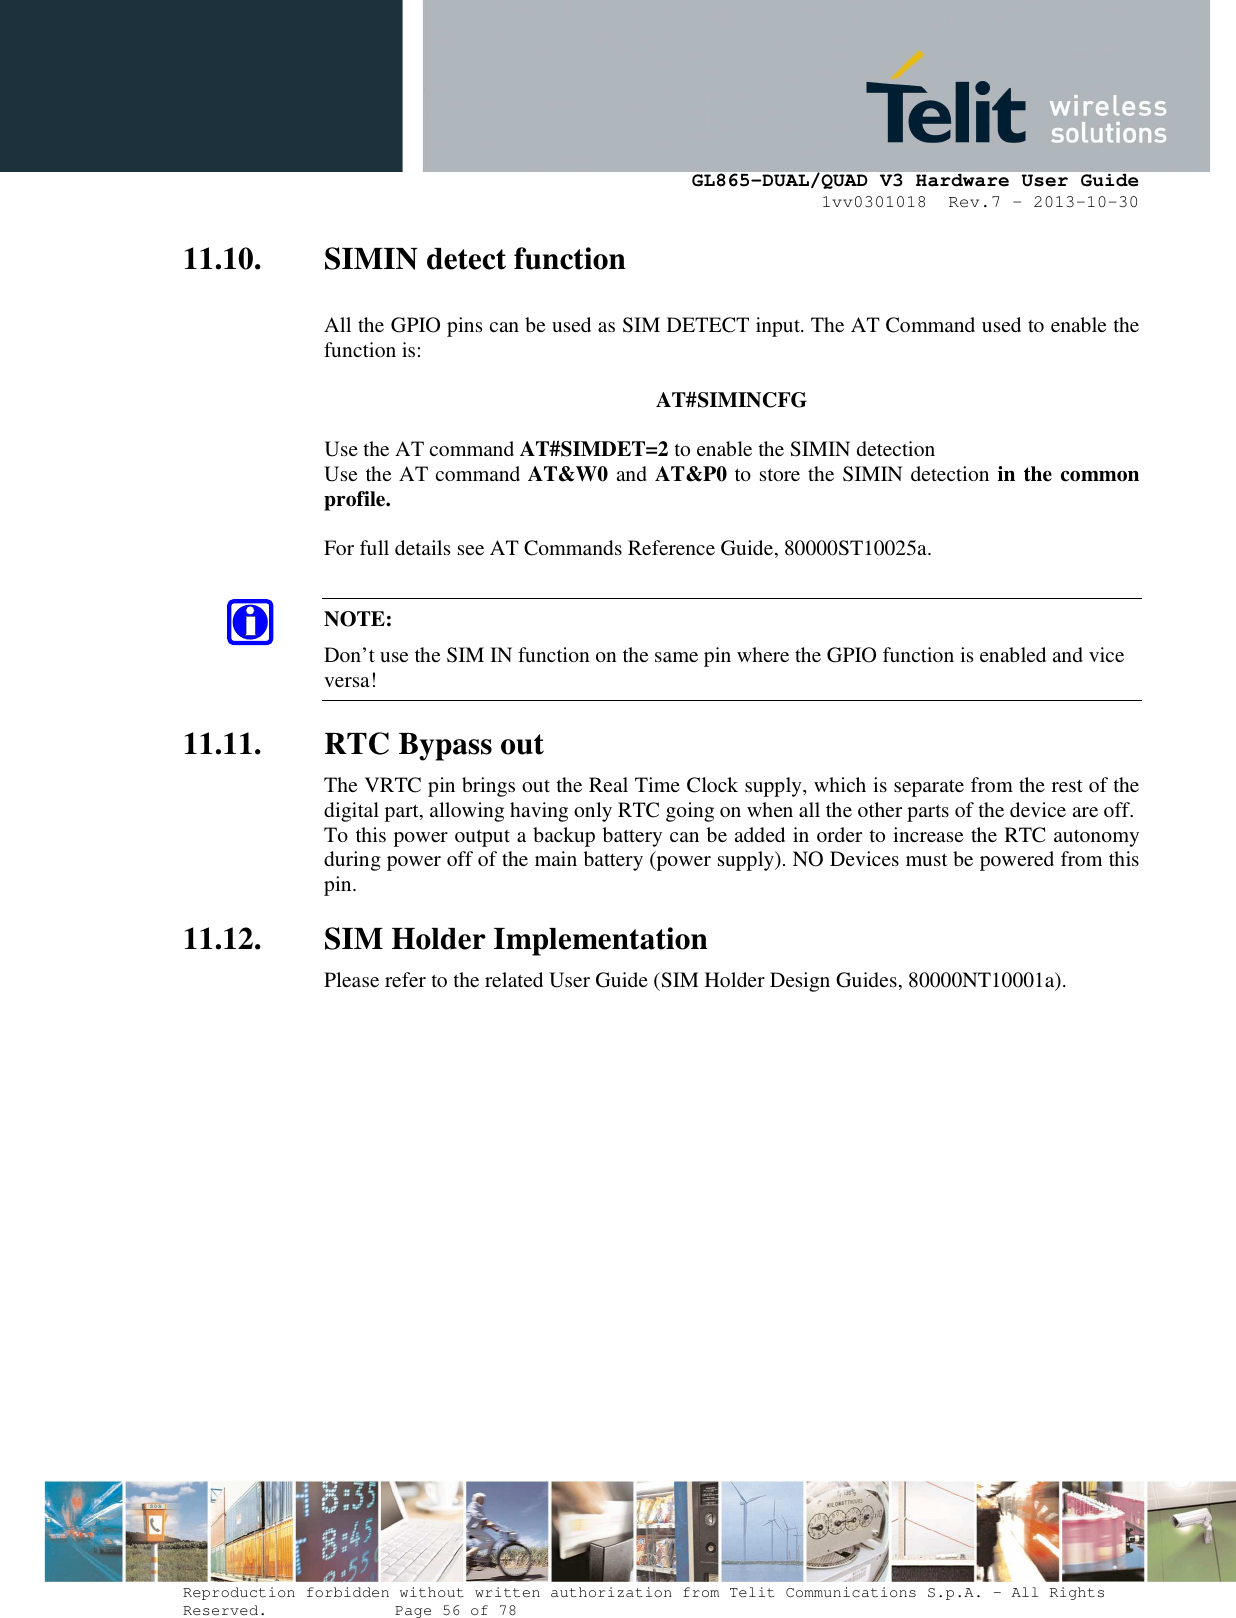      GL865-DUAL/QUAD V3 Hardware User Guide 1vv0301018  Rev.7 – 2013-10-30  Reproduction forbidden without written authorization from Telit Communications S.p.A. - All Rights Reserved.    Page 56 of 78 Mod. 0805 2011-07 Rev.2 11.10. SIMIN detect function  All the GPIO pins can be used as SIM DETECT input. The AT Command used to enable the function is:    AT#SIMINCFG  Use the AT command AT#SIMDET=2 to enable the SIMIN detection  Use the AT command AT&amp;W0 and AT&amp;P0 to store the SIMIN detection in the common profile.  For full details see AT Commands Reference Guide, 80000ST10025a.  NOTE: Don’t use the SIM IN function on the same pin where the GPIO function is enabled and vice versa! 11.11. RTC Bypass out The VRTC pin brings out the Real Time Clock supply, which is separate from the rest of the digital part, allowing having only RTC going on when all the other parts of the device are off. To this power output a backup battery can be added in order to increase the RTC autonomy during power off of the main battery (power supply). NO Devices must be powered from this pin. 11.12. SIM Holder Implementation Please refer to the related User Guide (SIM Holder Design Guides, 80000NT10001a).  